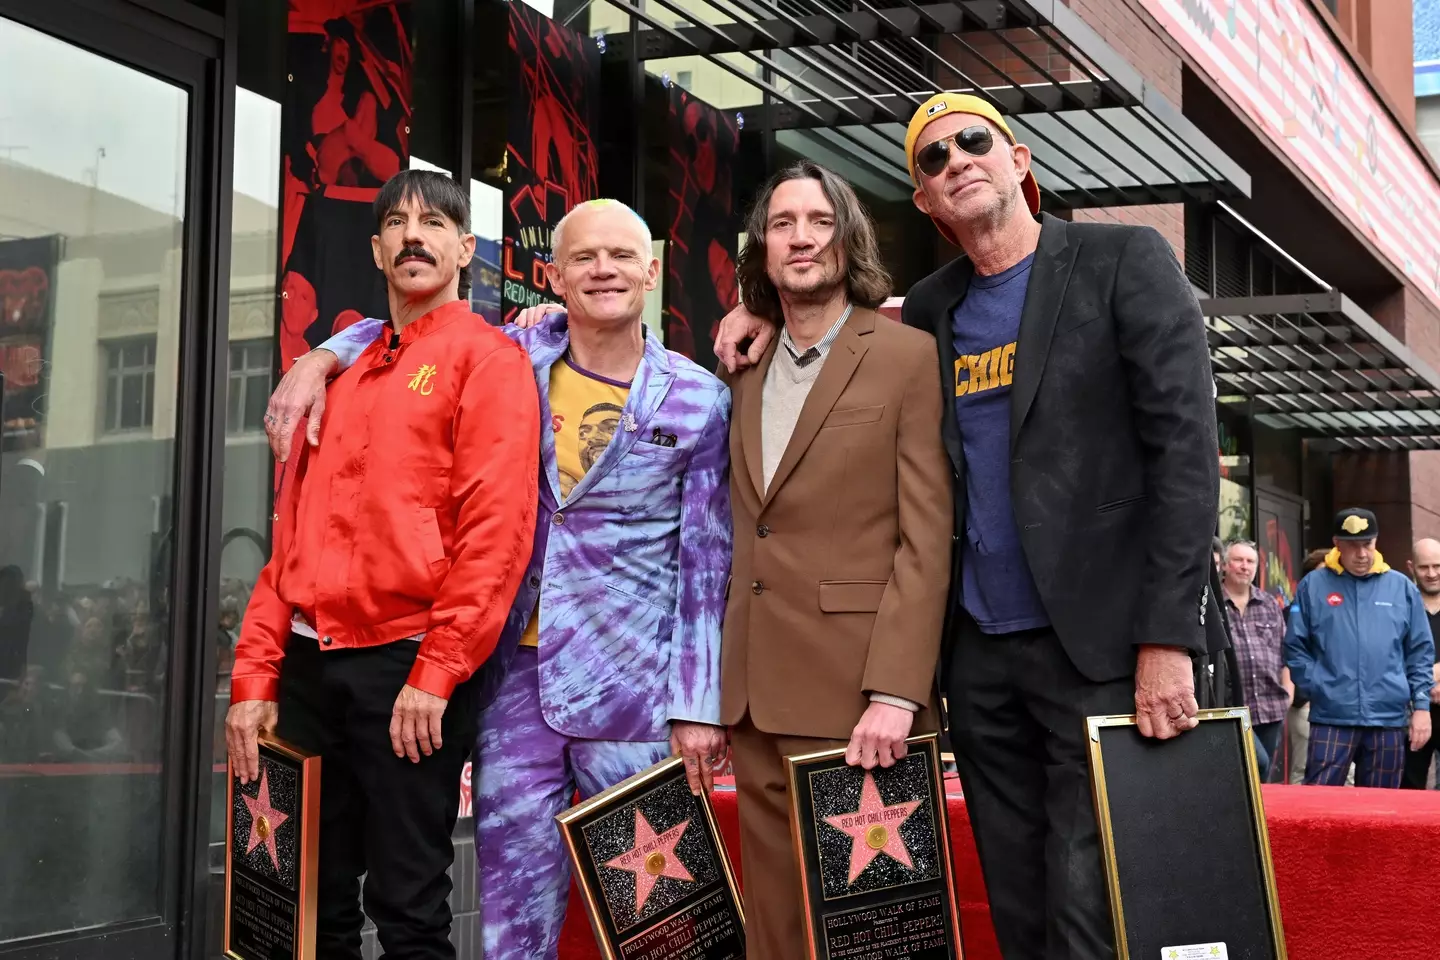 The Red Hot Chili Peppers might just have banked on history repeating instead of predicting the future.